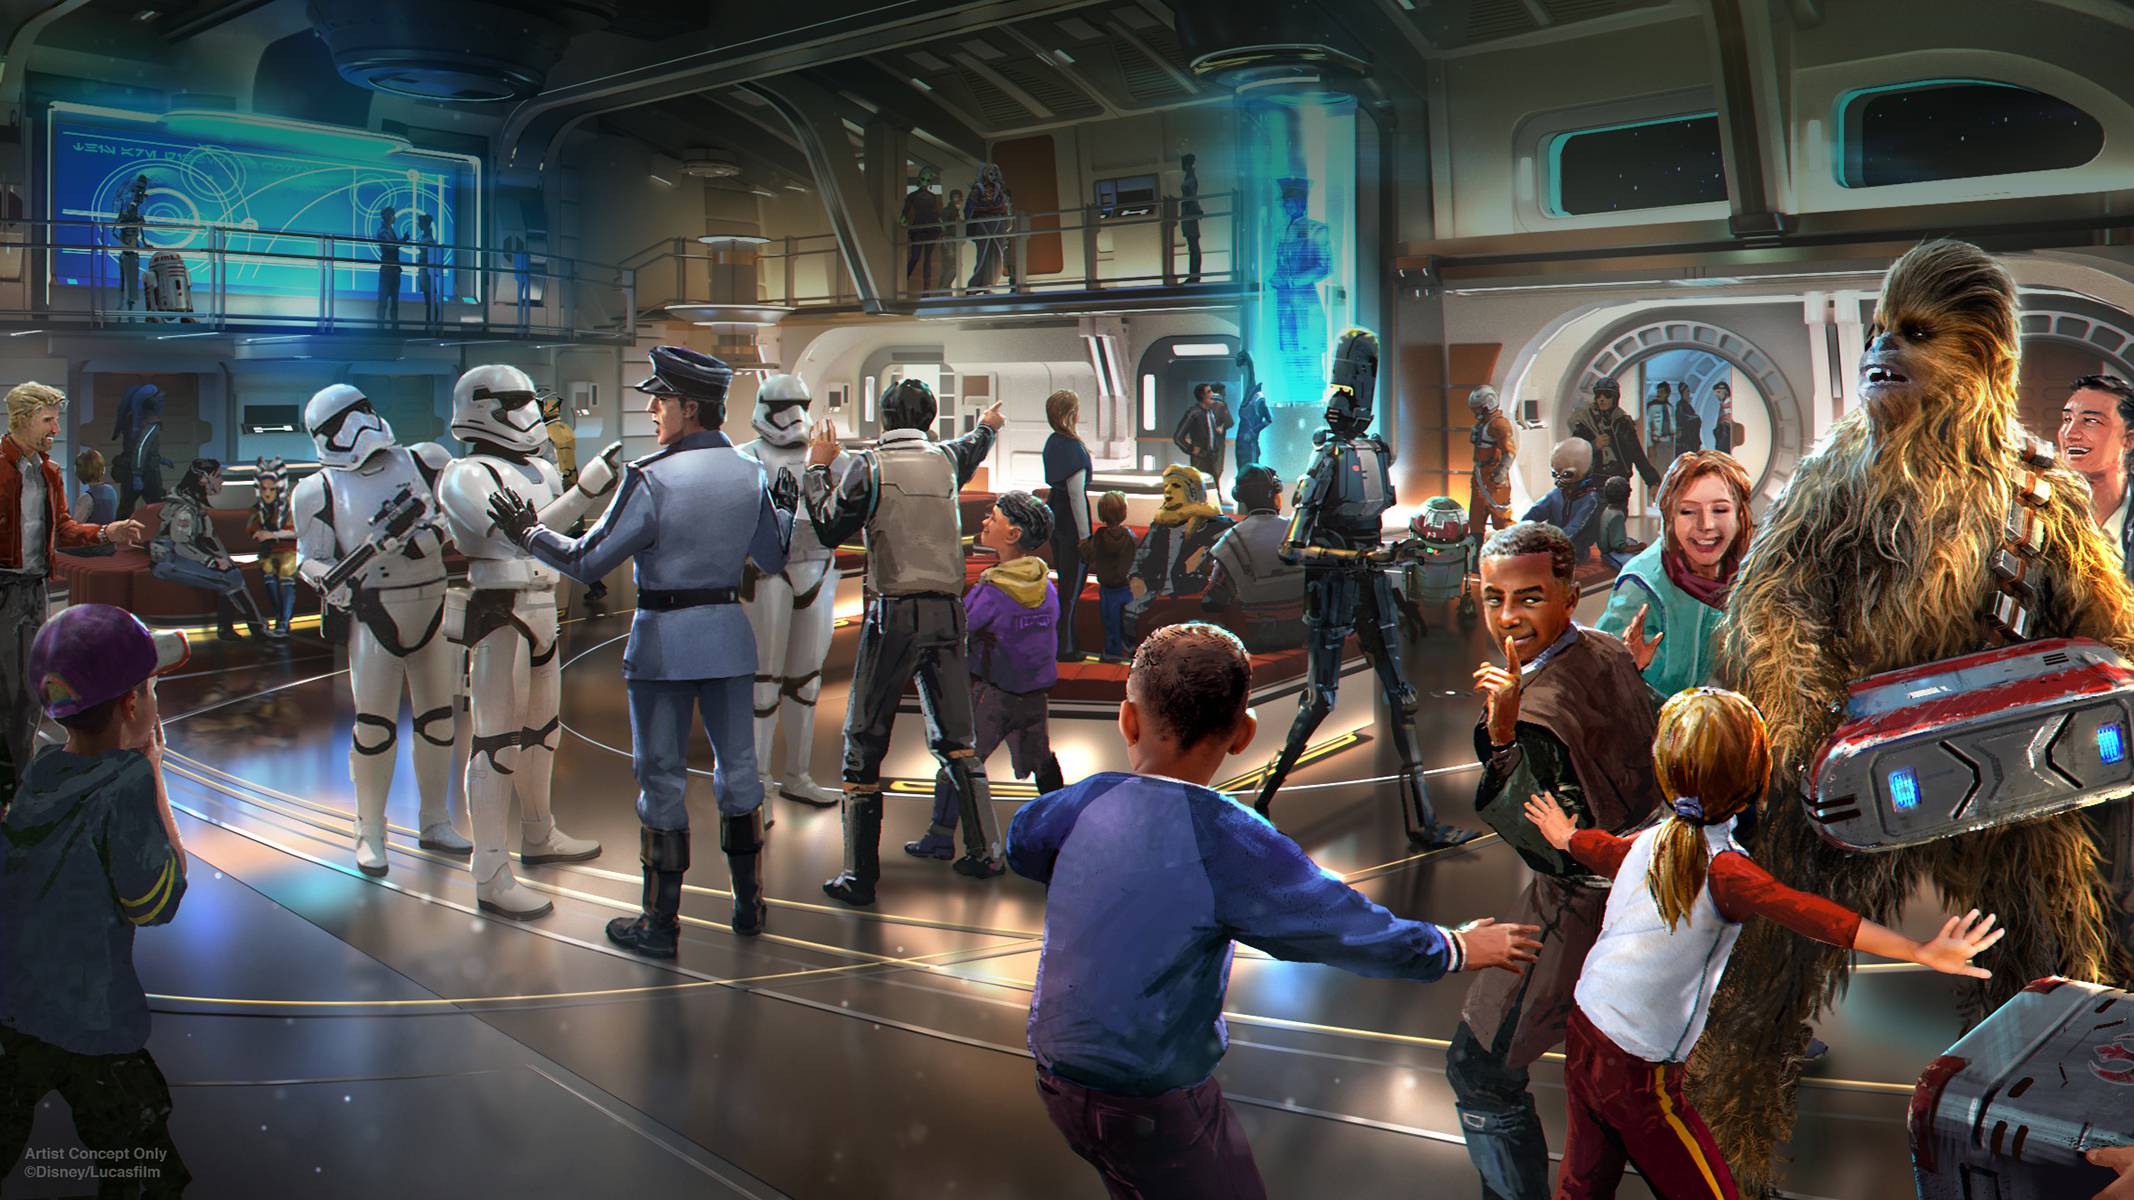 Test voyages on 'Star Wars Galactic Starcruiser' to begin in February - enter for a chance to win a place aboard the Halcyon